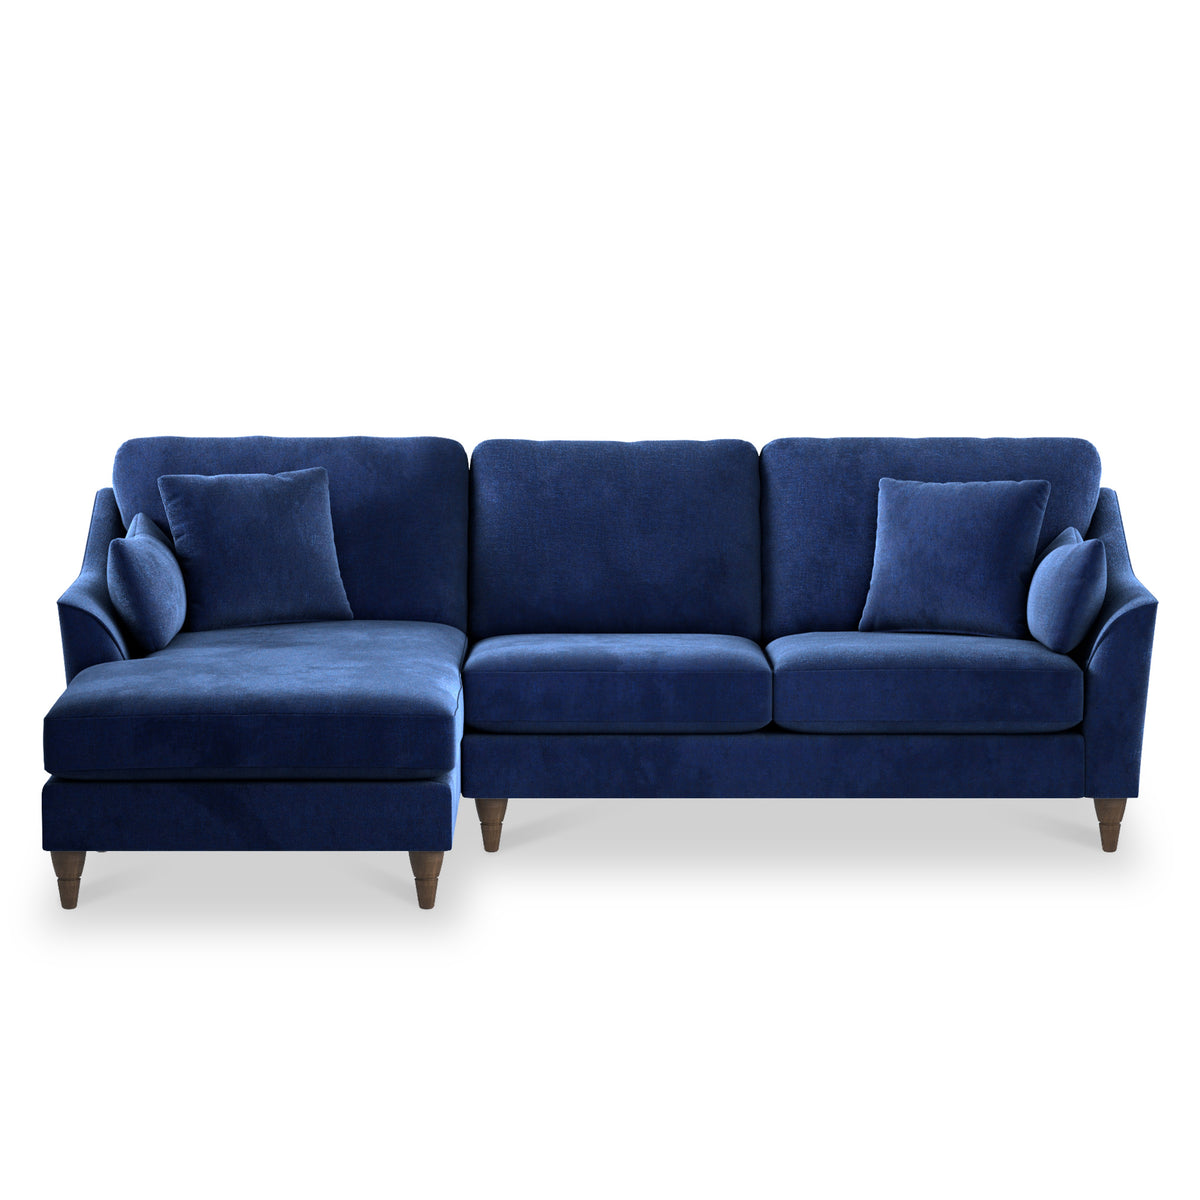 Charice Navy Blue Left Hand Chaise Sofa